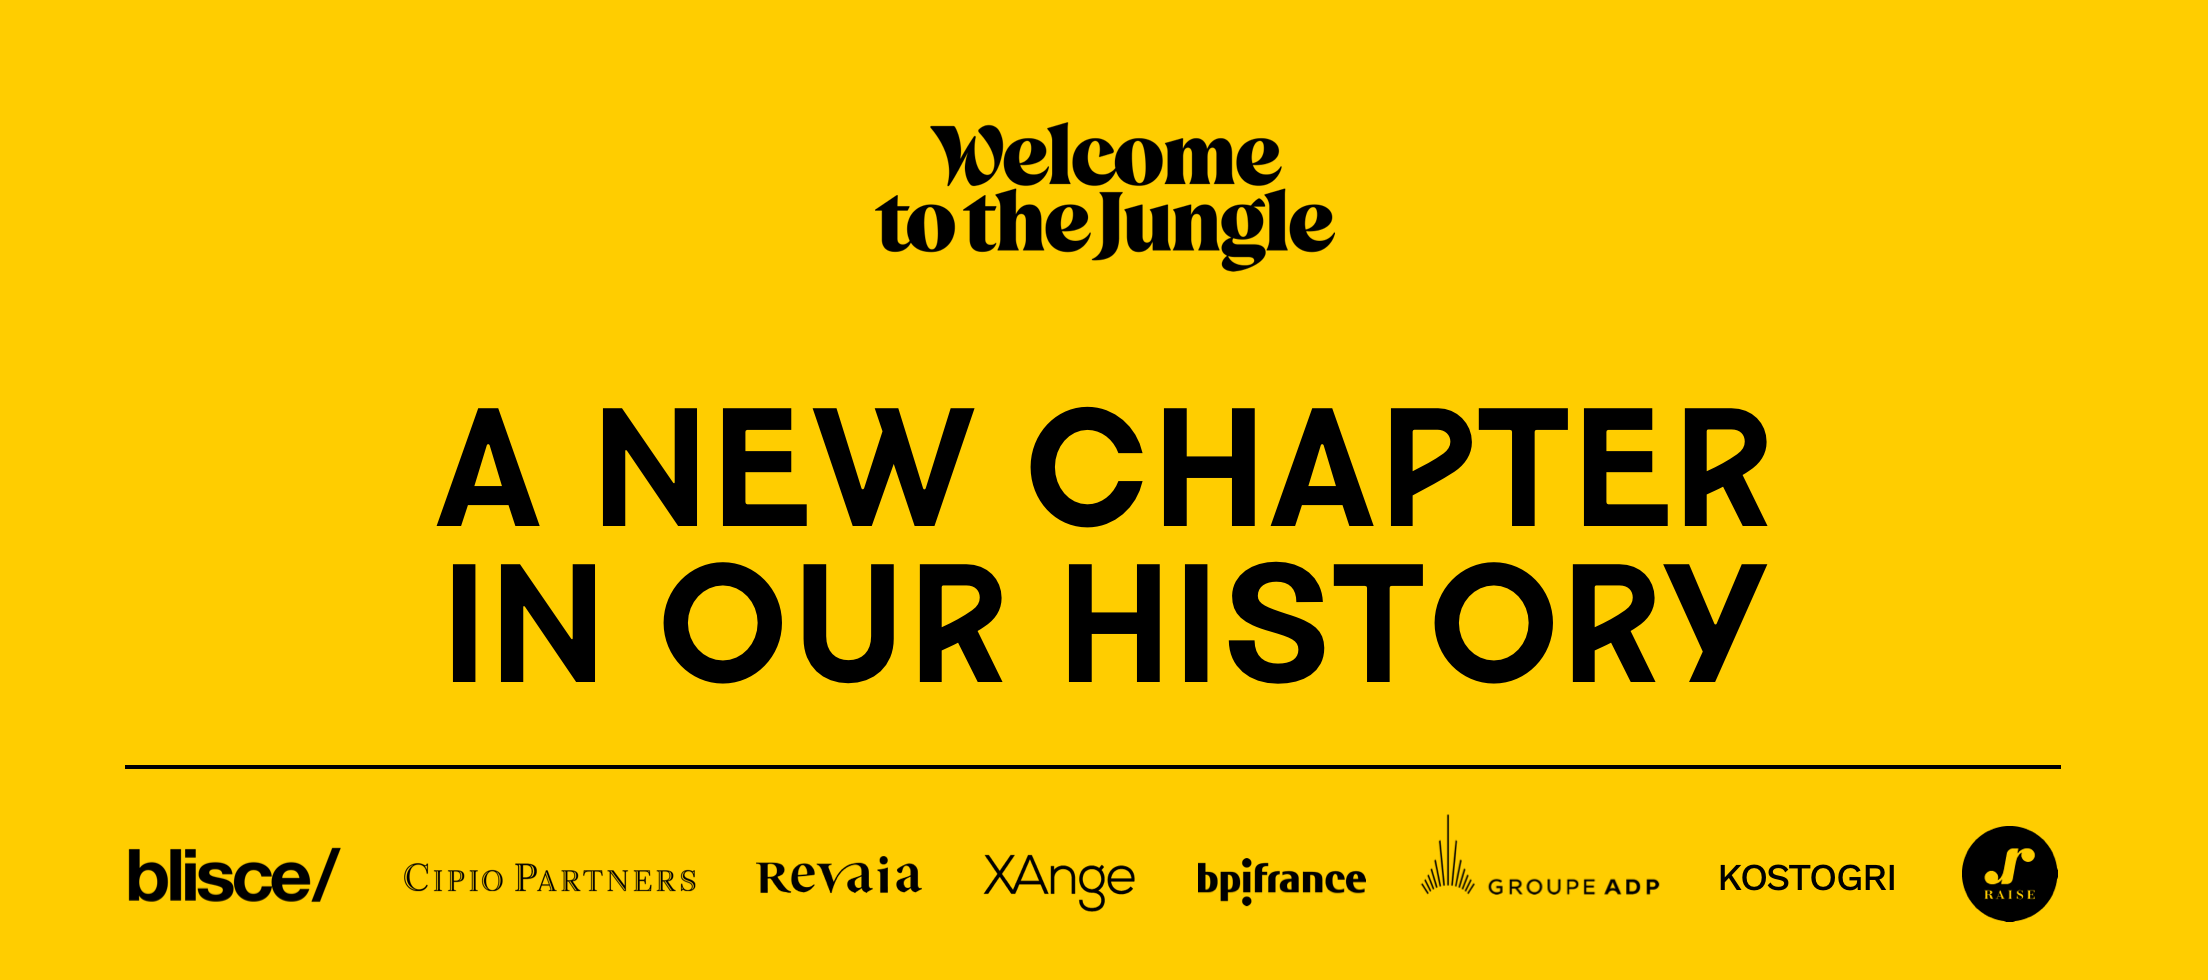 Welcome to the Jungle raises €50 million to further expand in Europe and the US